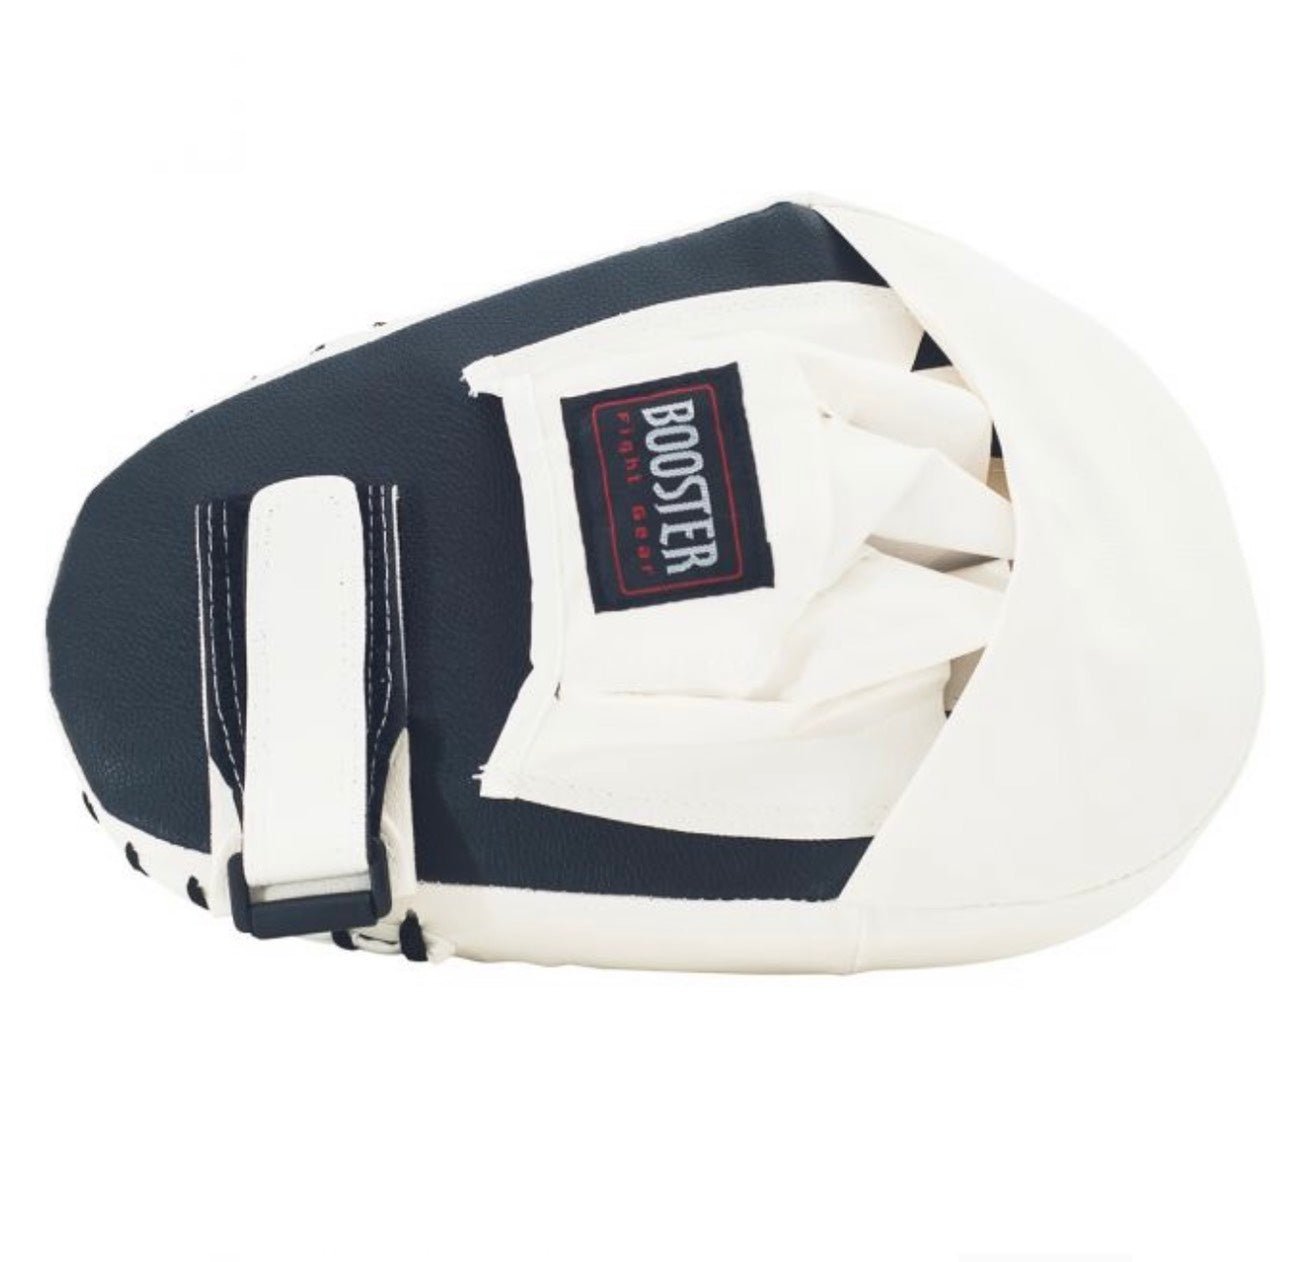 Booster Focus Mitts PML B Fitness Collection - SUPER EXPORT SHOP